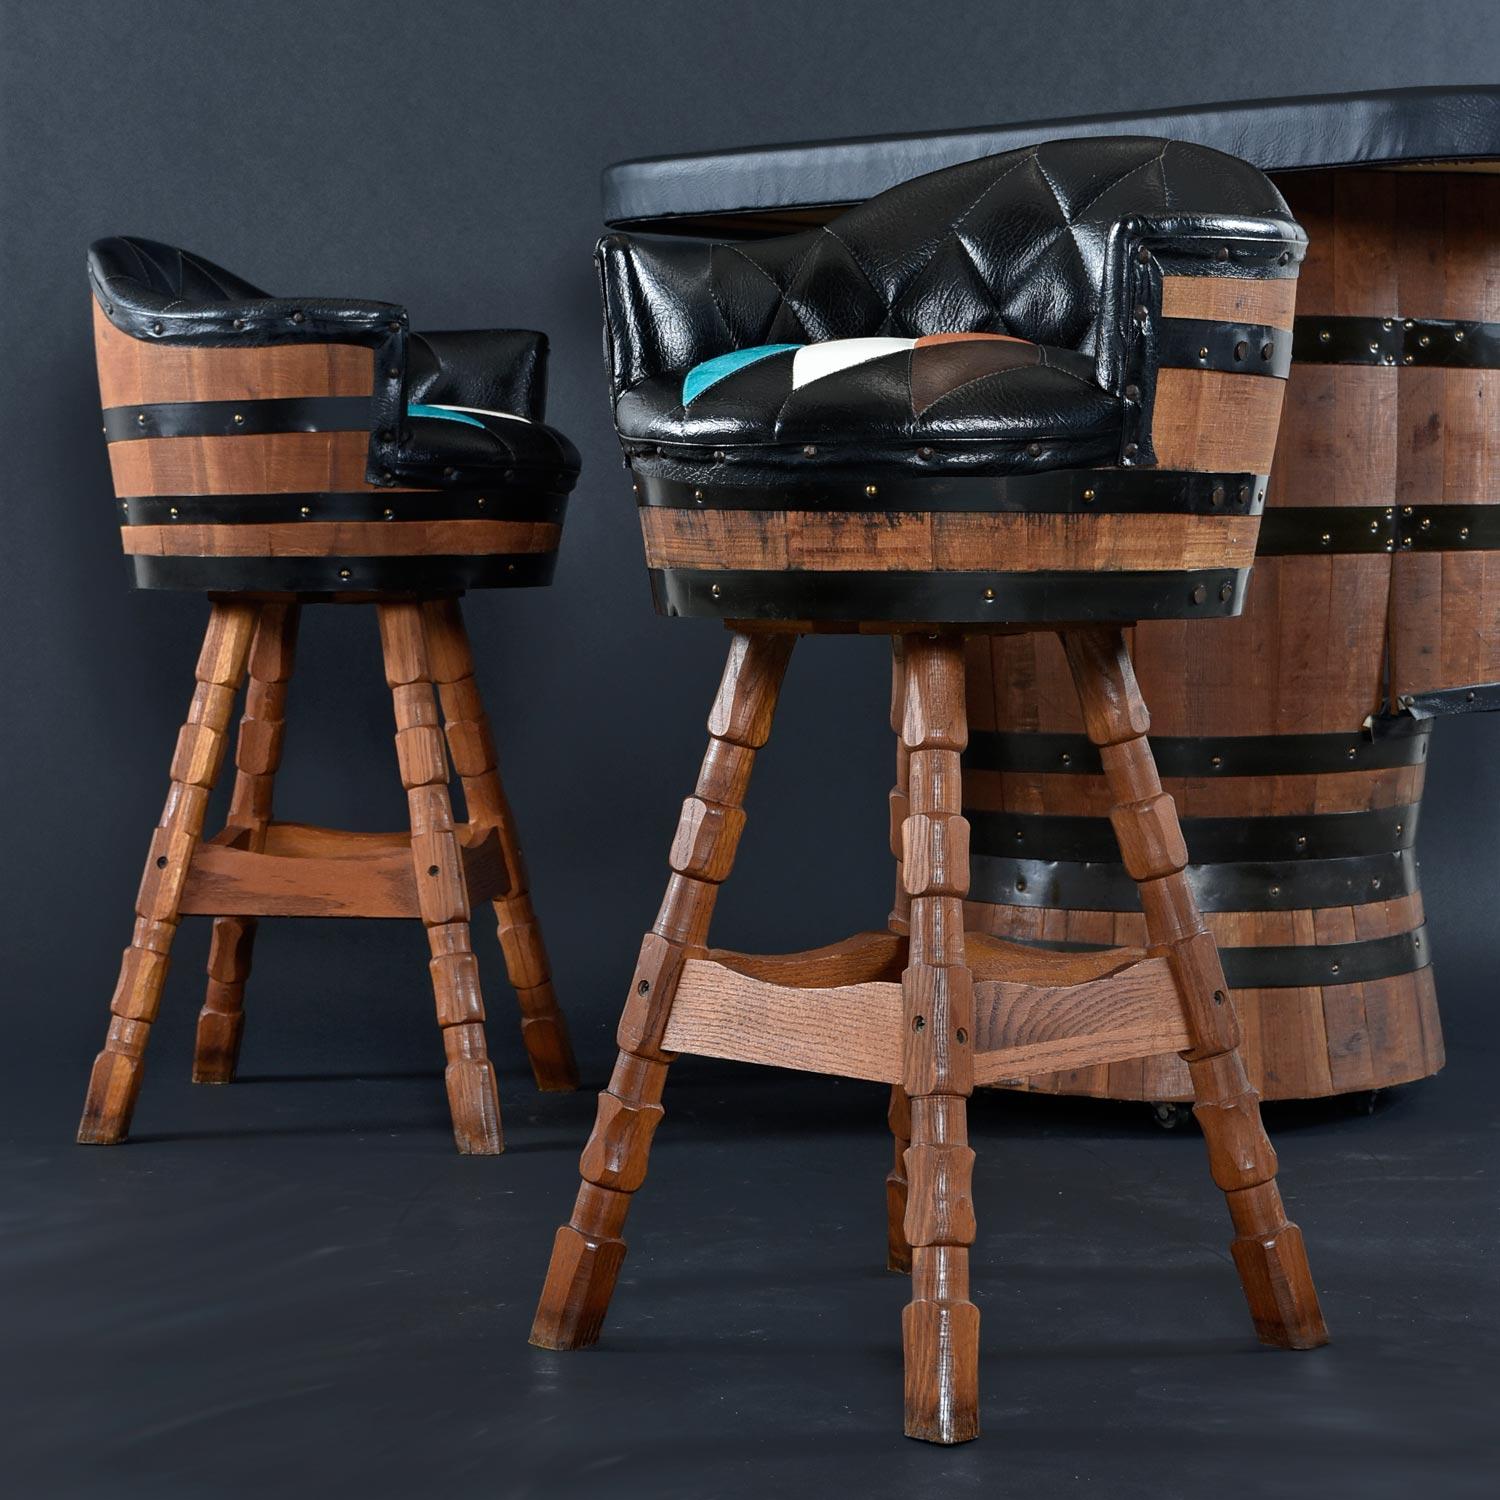 Rustic Brothers Furniture Harlequin Whiskey Barrel Dry Bar Set with Bar Stools